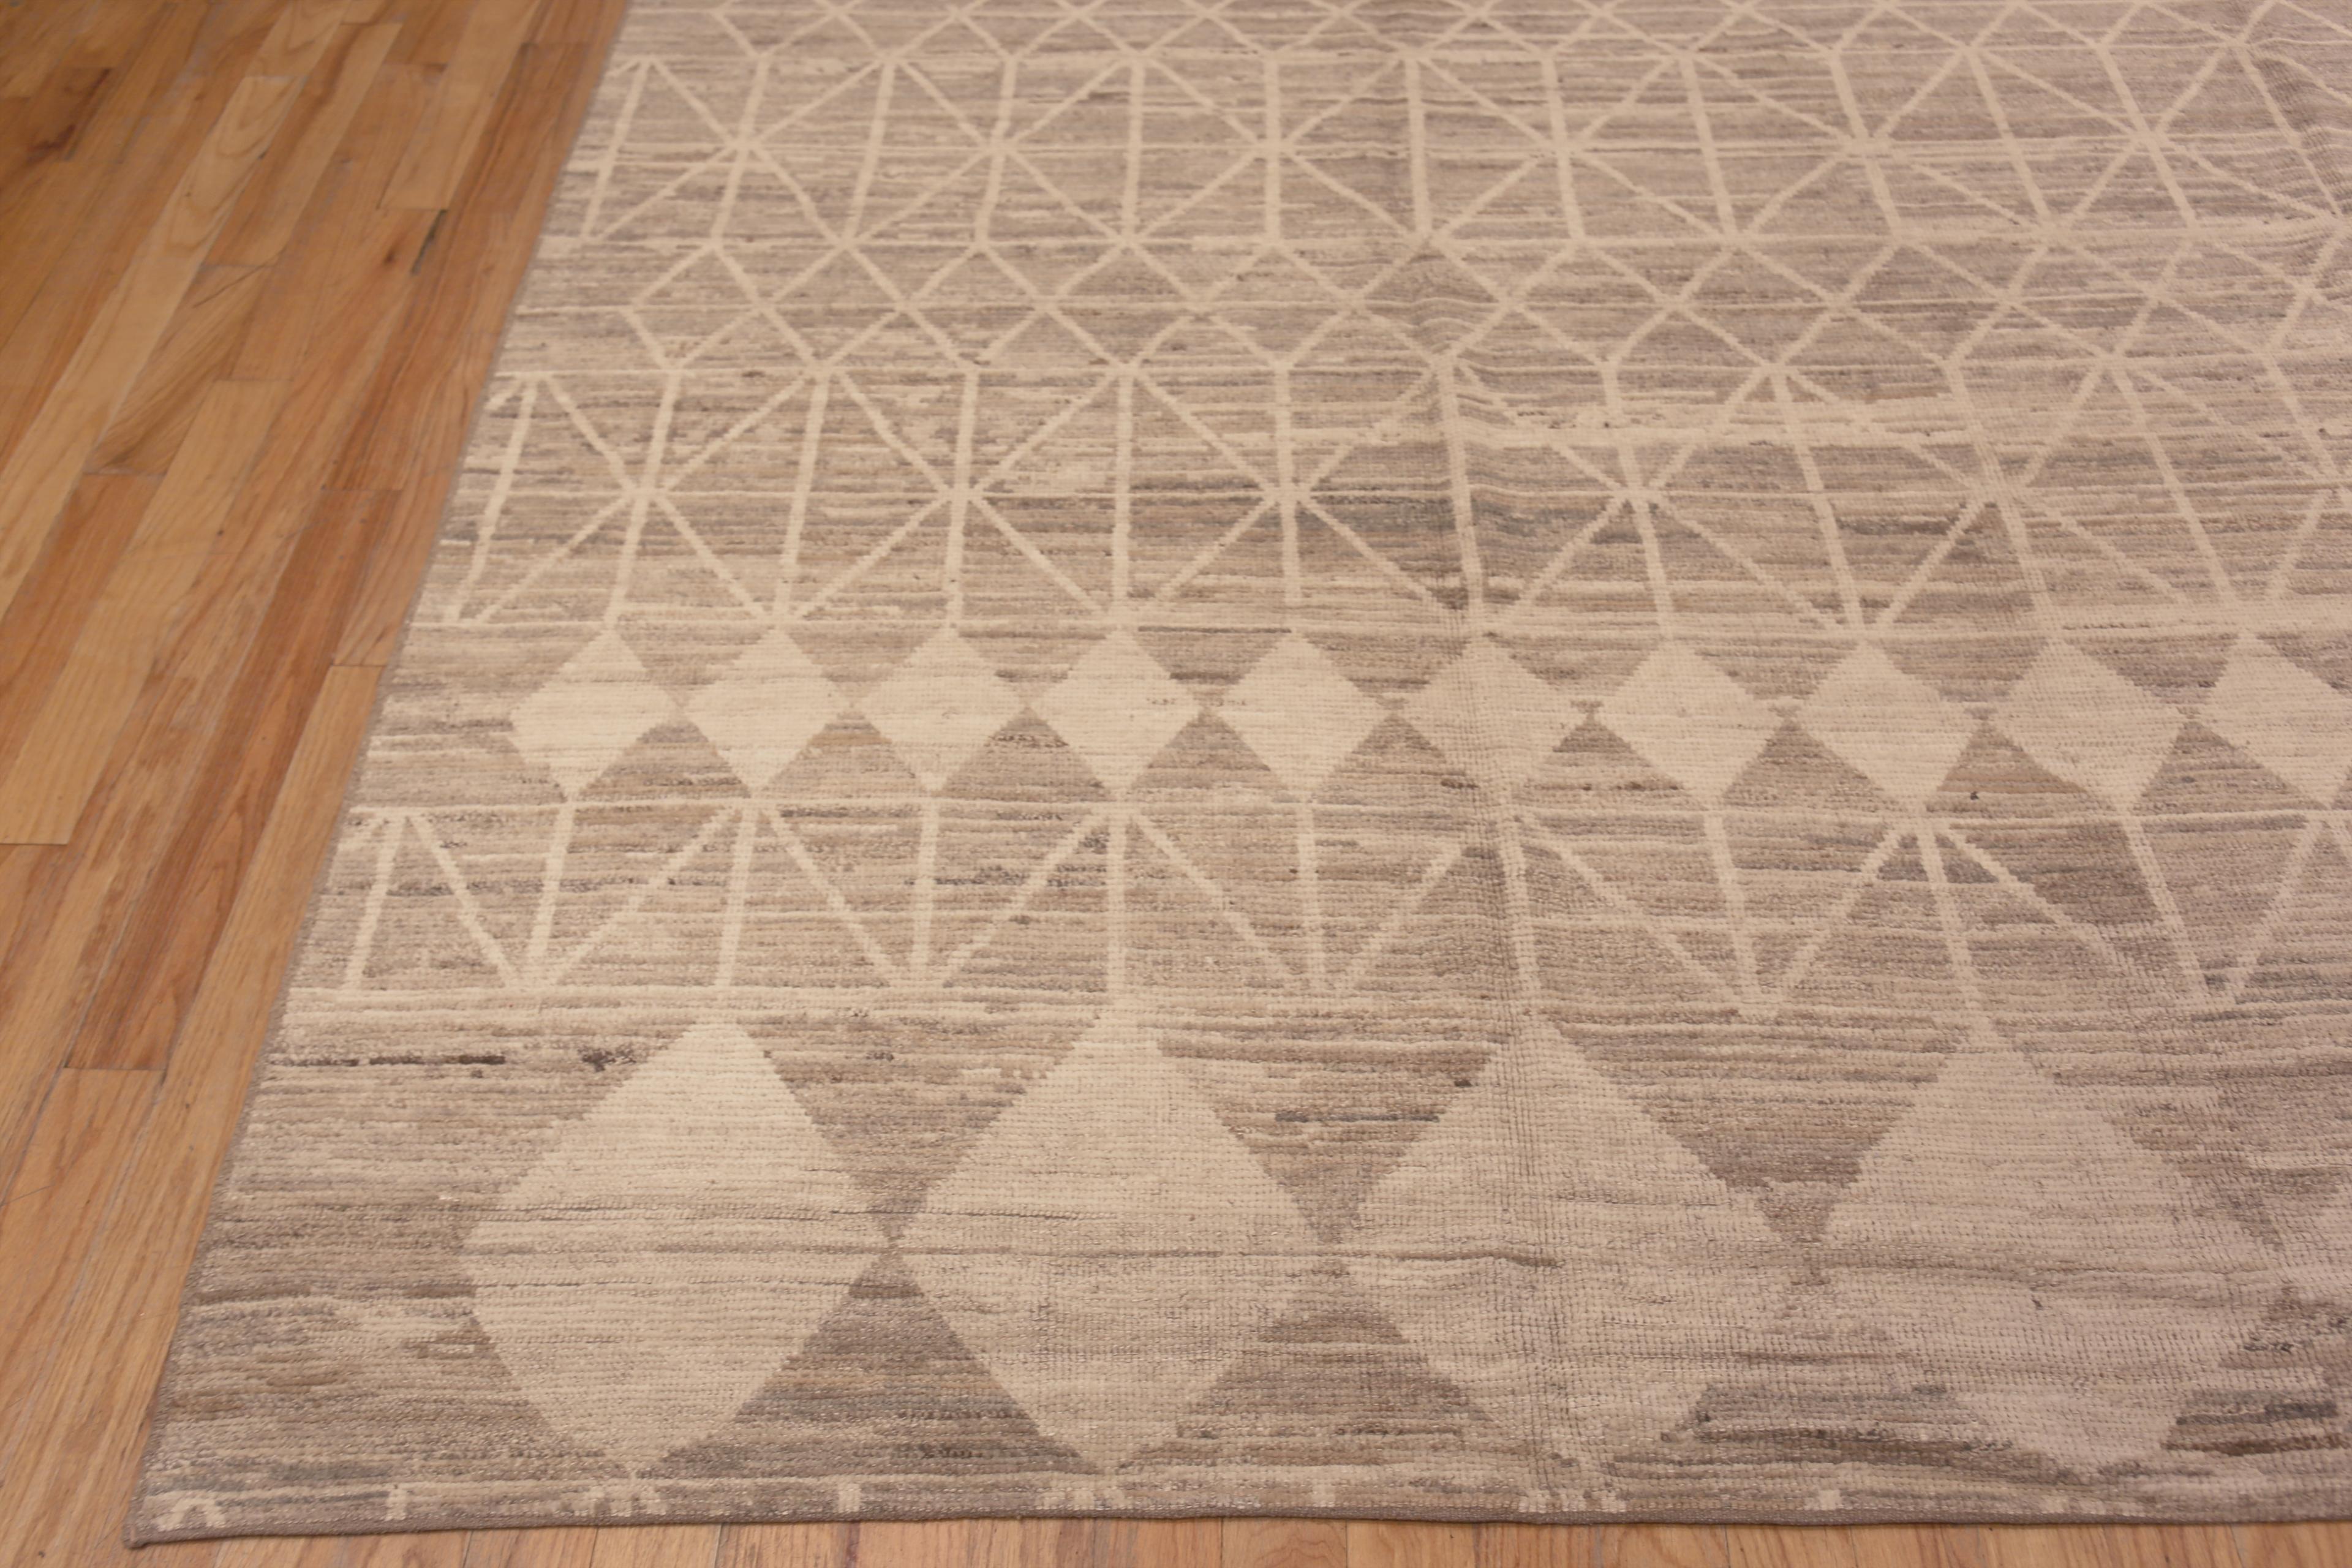 Contemporary Nazmiyal Collection Handmade Tribal Geometric Modern Room Size Rug 10' x 14' For Sale